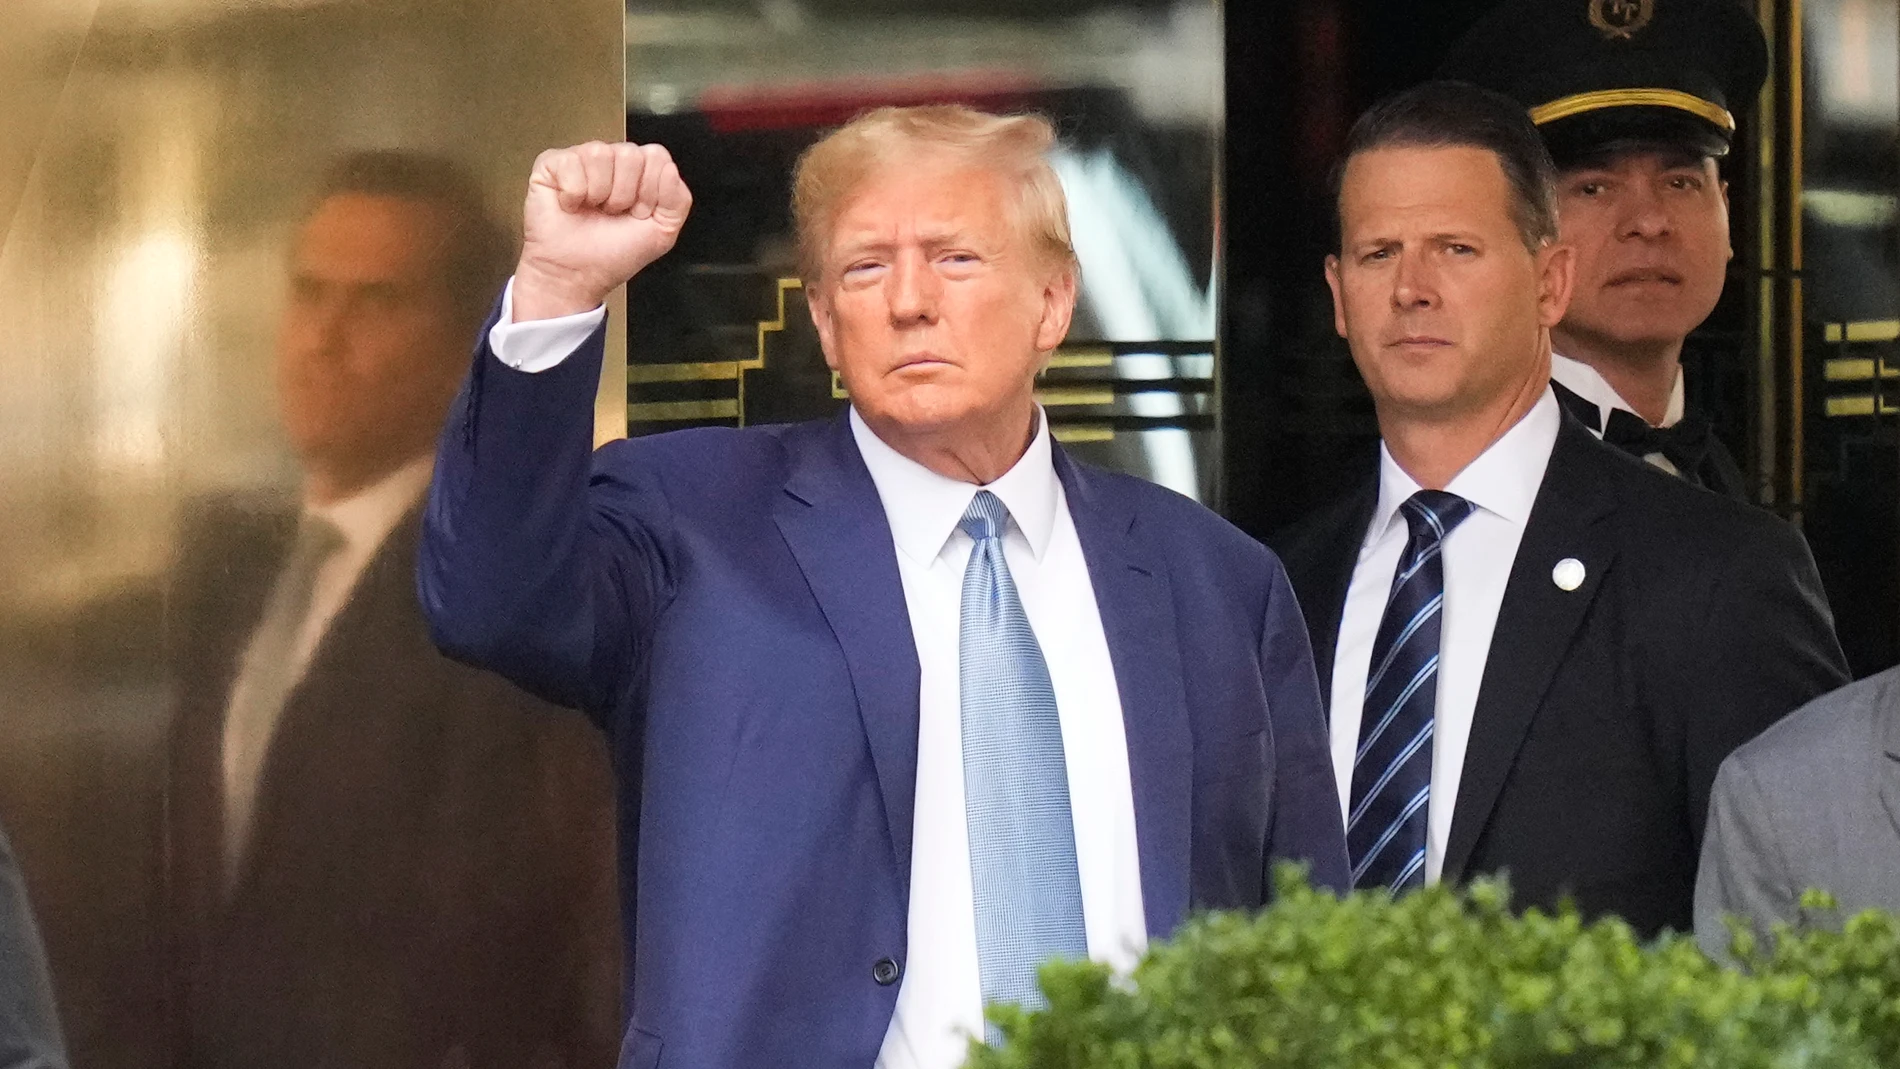 FILE - Former President Donald Trump, left, gestures as he leaves Trump Tower in New York, Thursday, April 13, 2023. The judge in Donald Trump's criminal case is holding a hybrid hearing Tuesday to make doubly sure the former president is aware of new rules barring him from using evidence to attack witnesses. Trump is allowed to speak publicly about the case, but he risks being held in contempt if he uses evidence turned over by prosecutors in the pretrial discovery process to target witnesses or others involved in the case. (AP Photo/Seth Wenig)